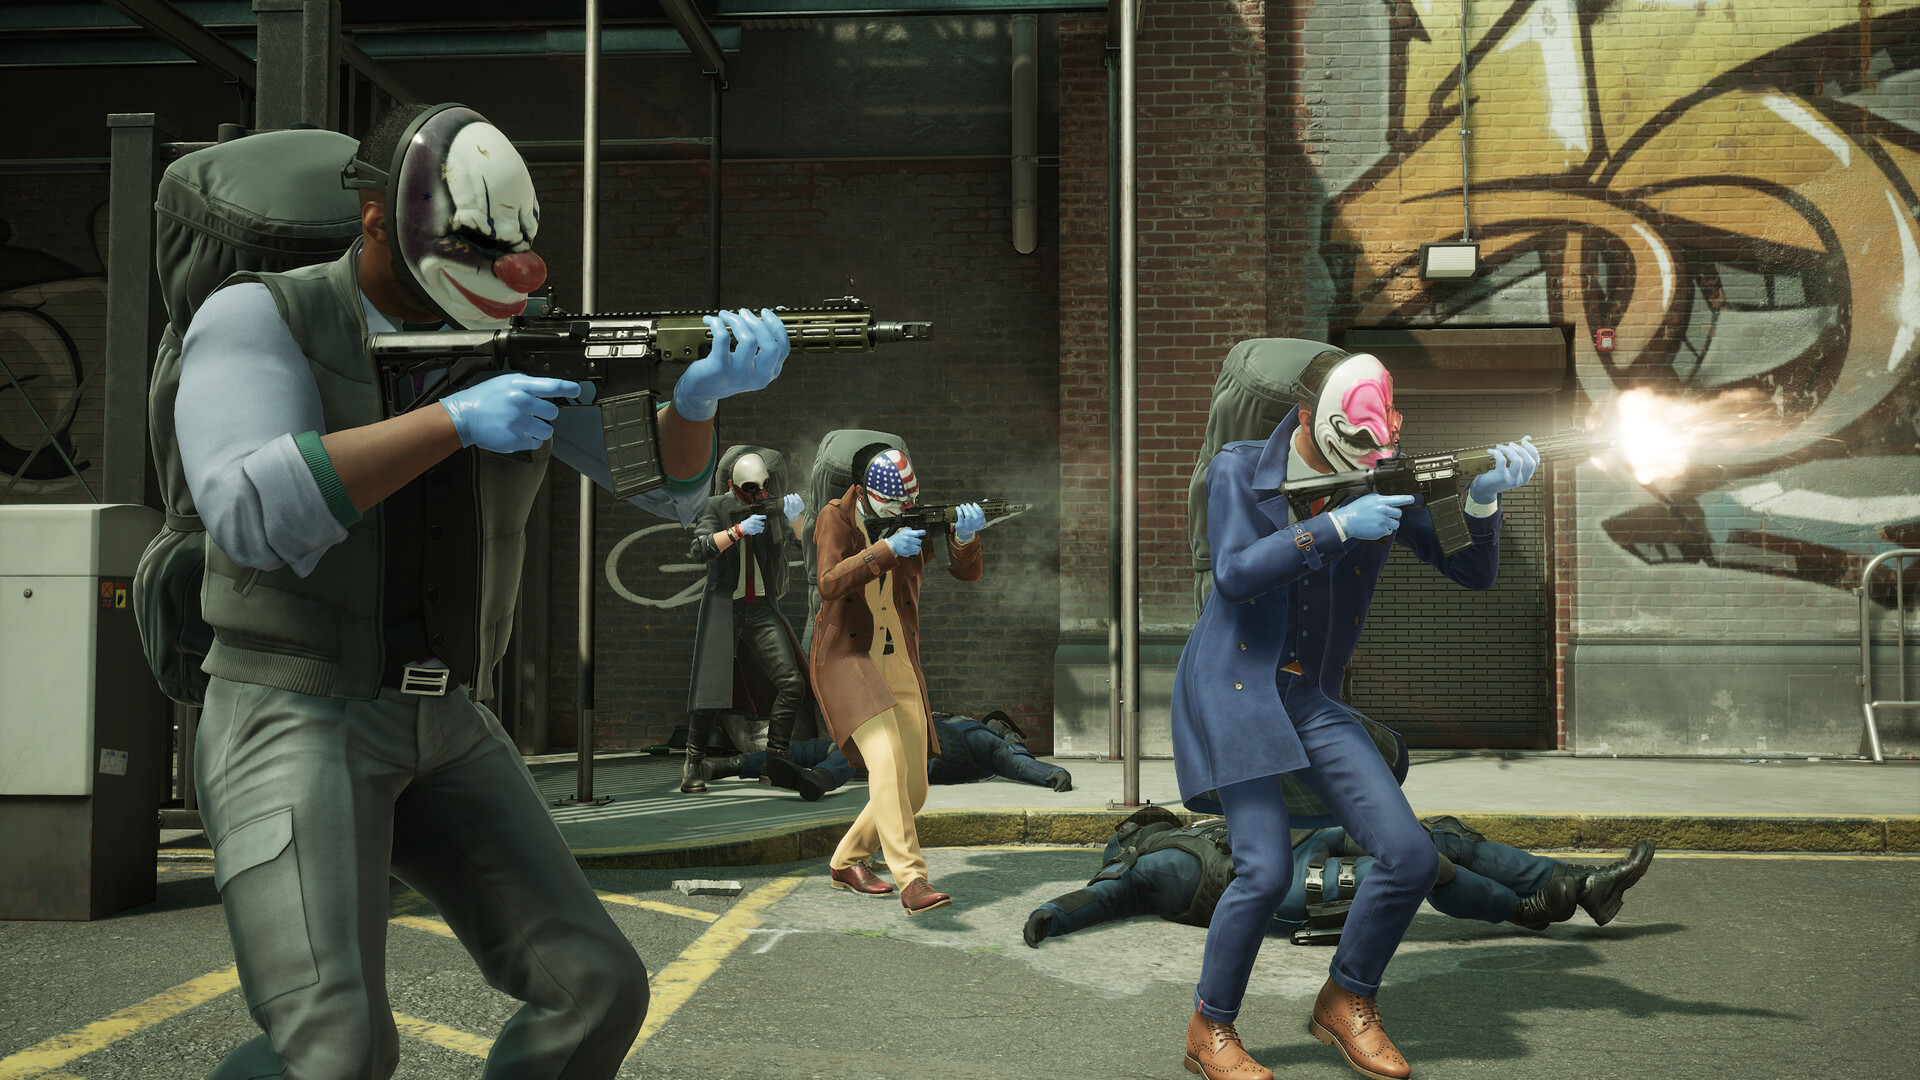 PAYDAY 3 Closed BETA - OVERKILL Software